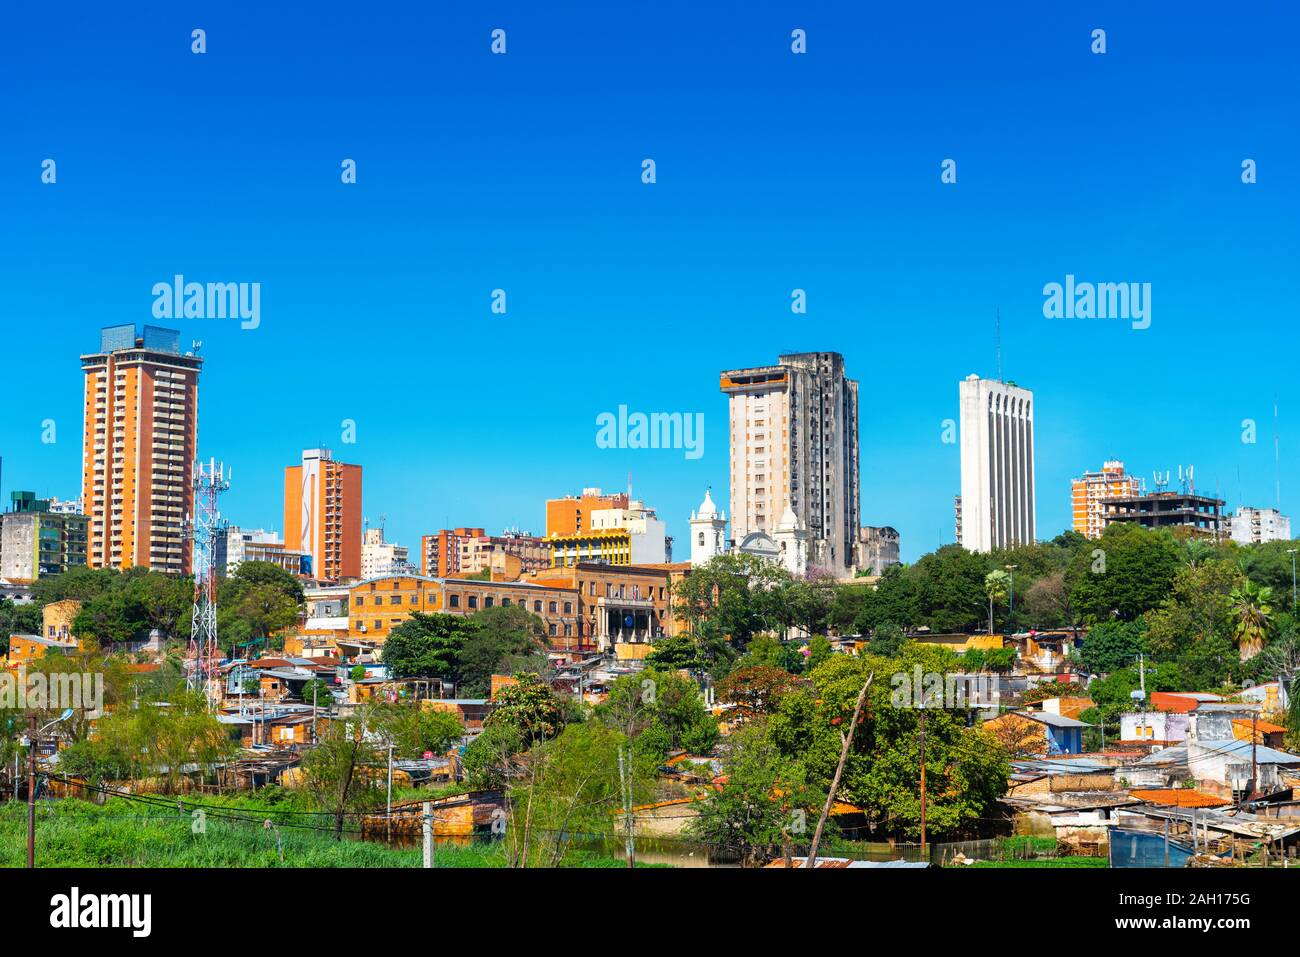 Skyscrapers and city buildings, Asuncion, Paraguay. City landscape. Copy space for text Stock Photo